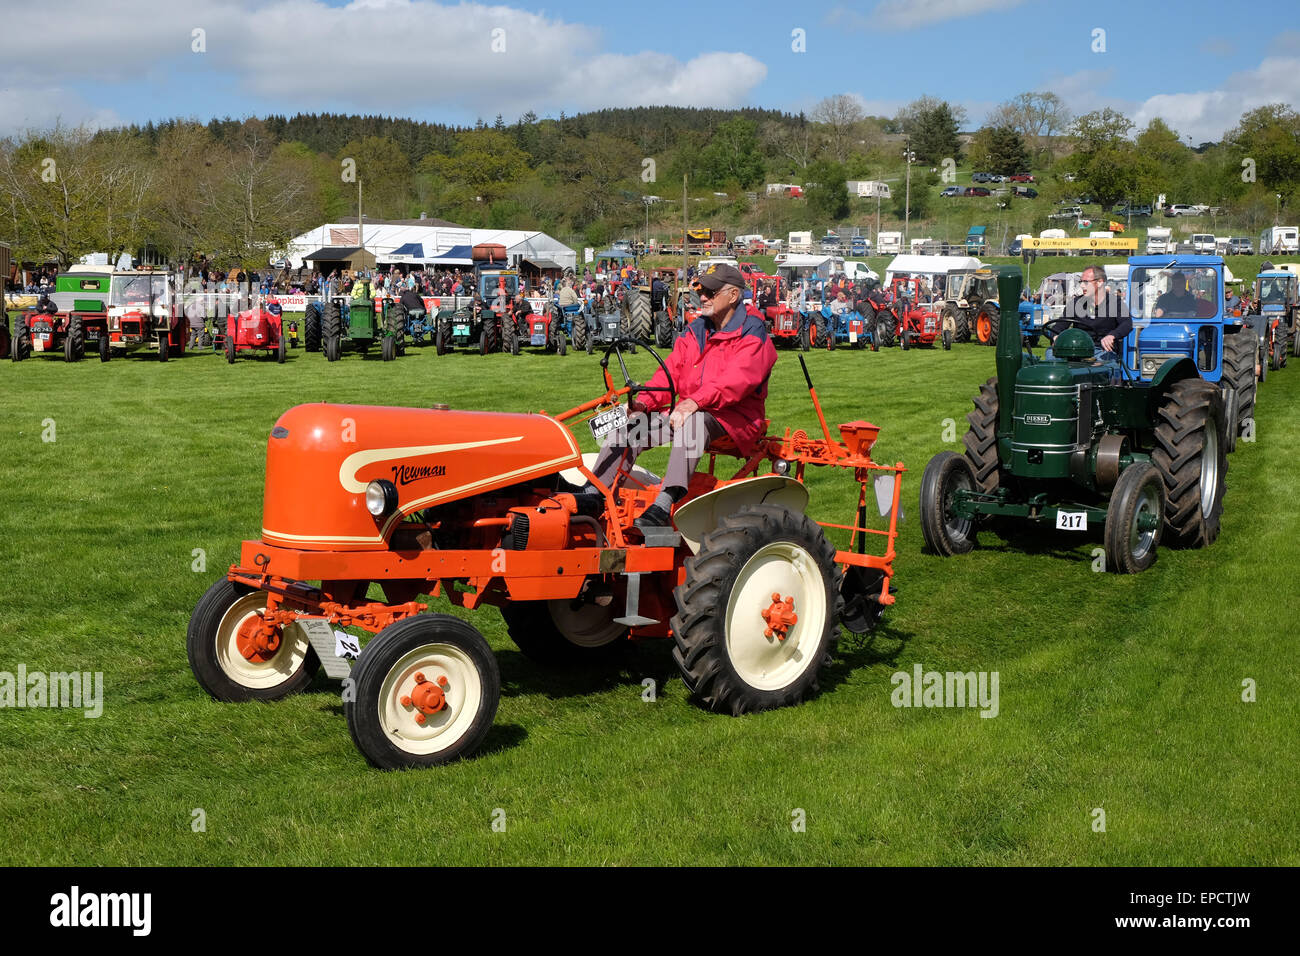 Royal Welsh Spring Festival Builth Wells, Powys, Wales, UK May, 2015. Parade of vintage tractors. Over 80 vehicles took part in the procession around the display arena including this late vintage 1940s Newman tractor built at Grantham, Lincolnshire as afternoon sunshine shone on the rural festival showground at Builth Wells in mid Wales. Stock Photo